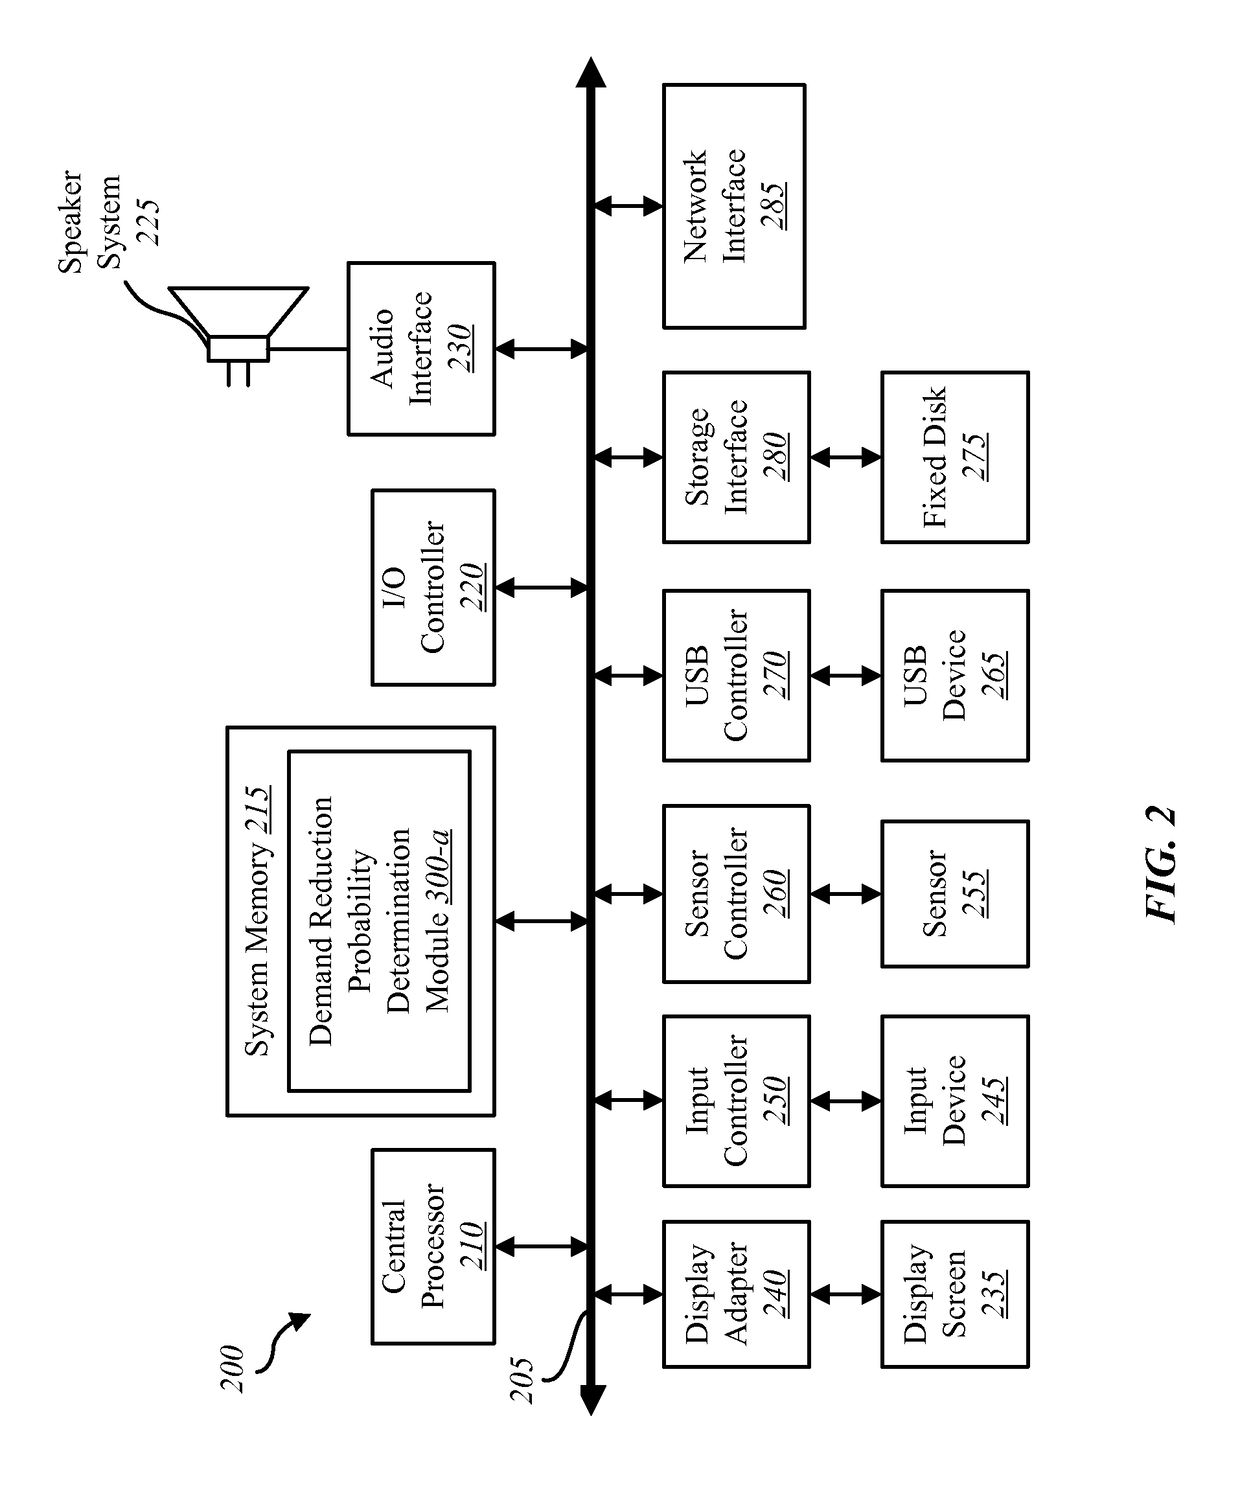 Demand reduction risk modeling and pricing systems and methods for intermittent energy generators